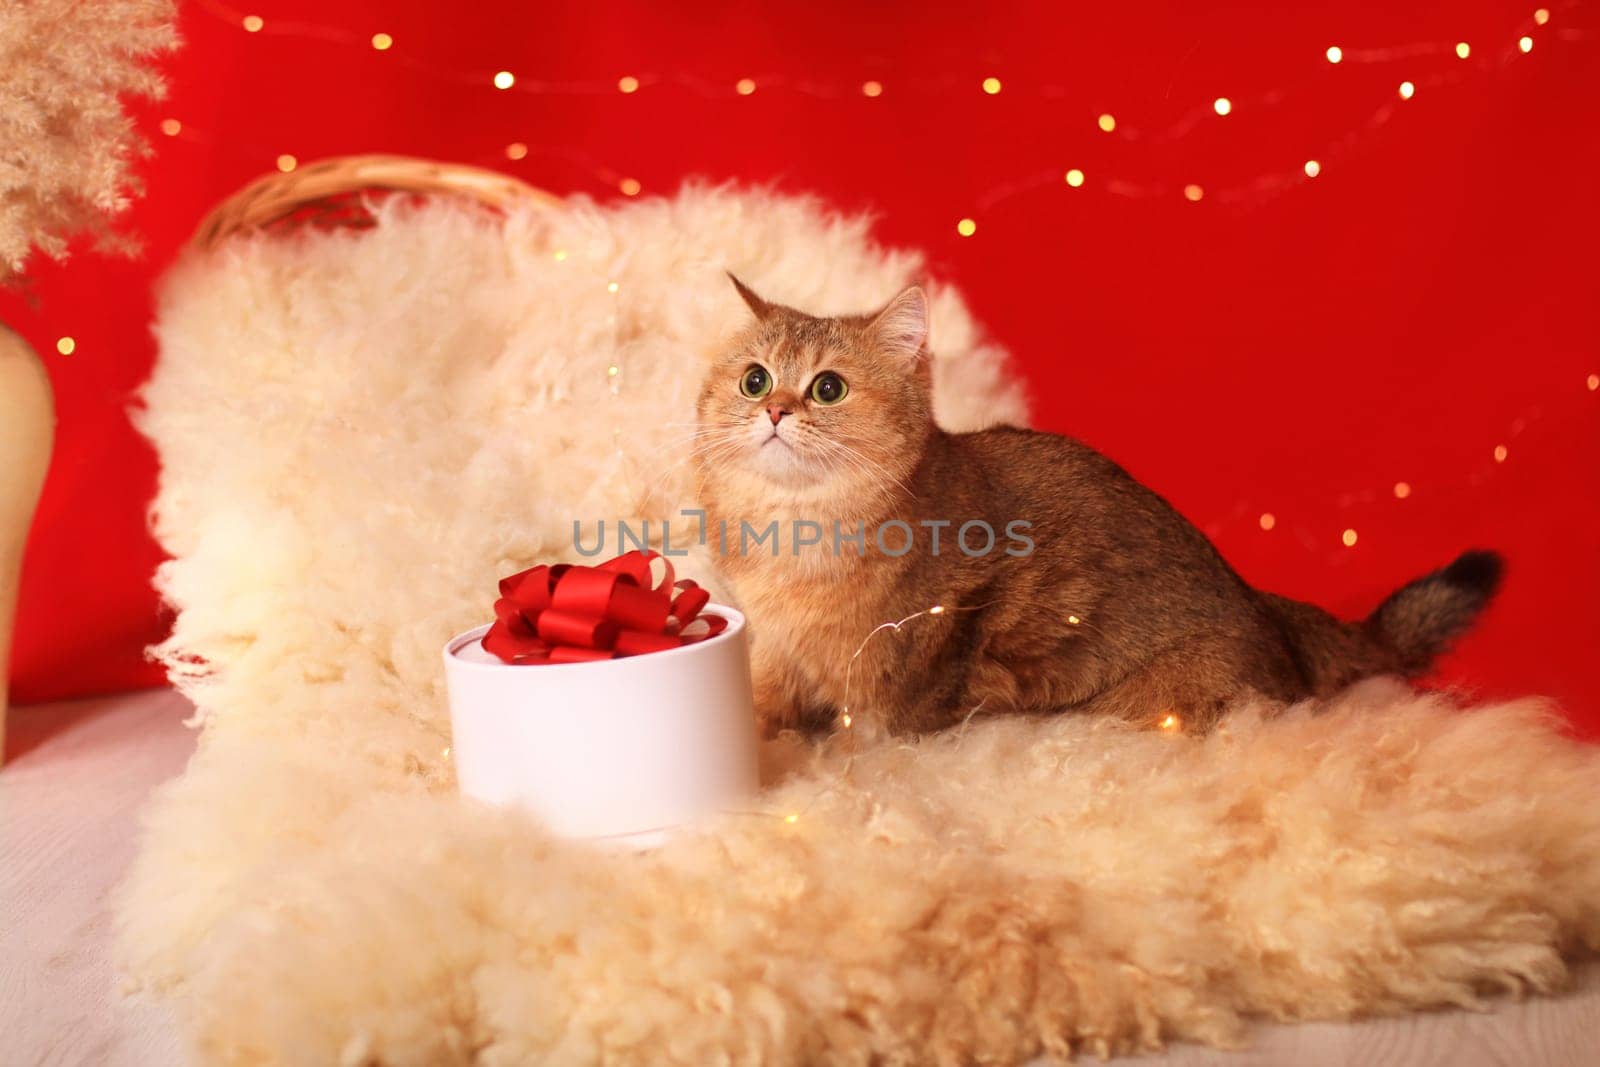 British red cat on fur near a gift box on a red background